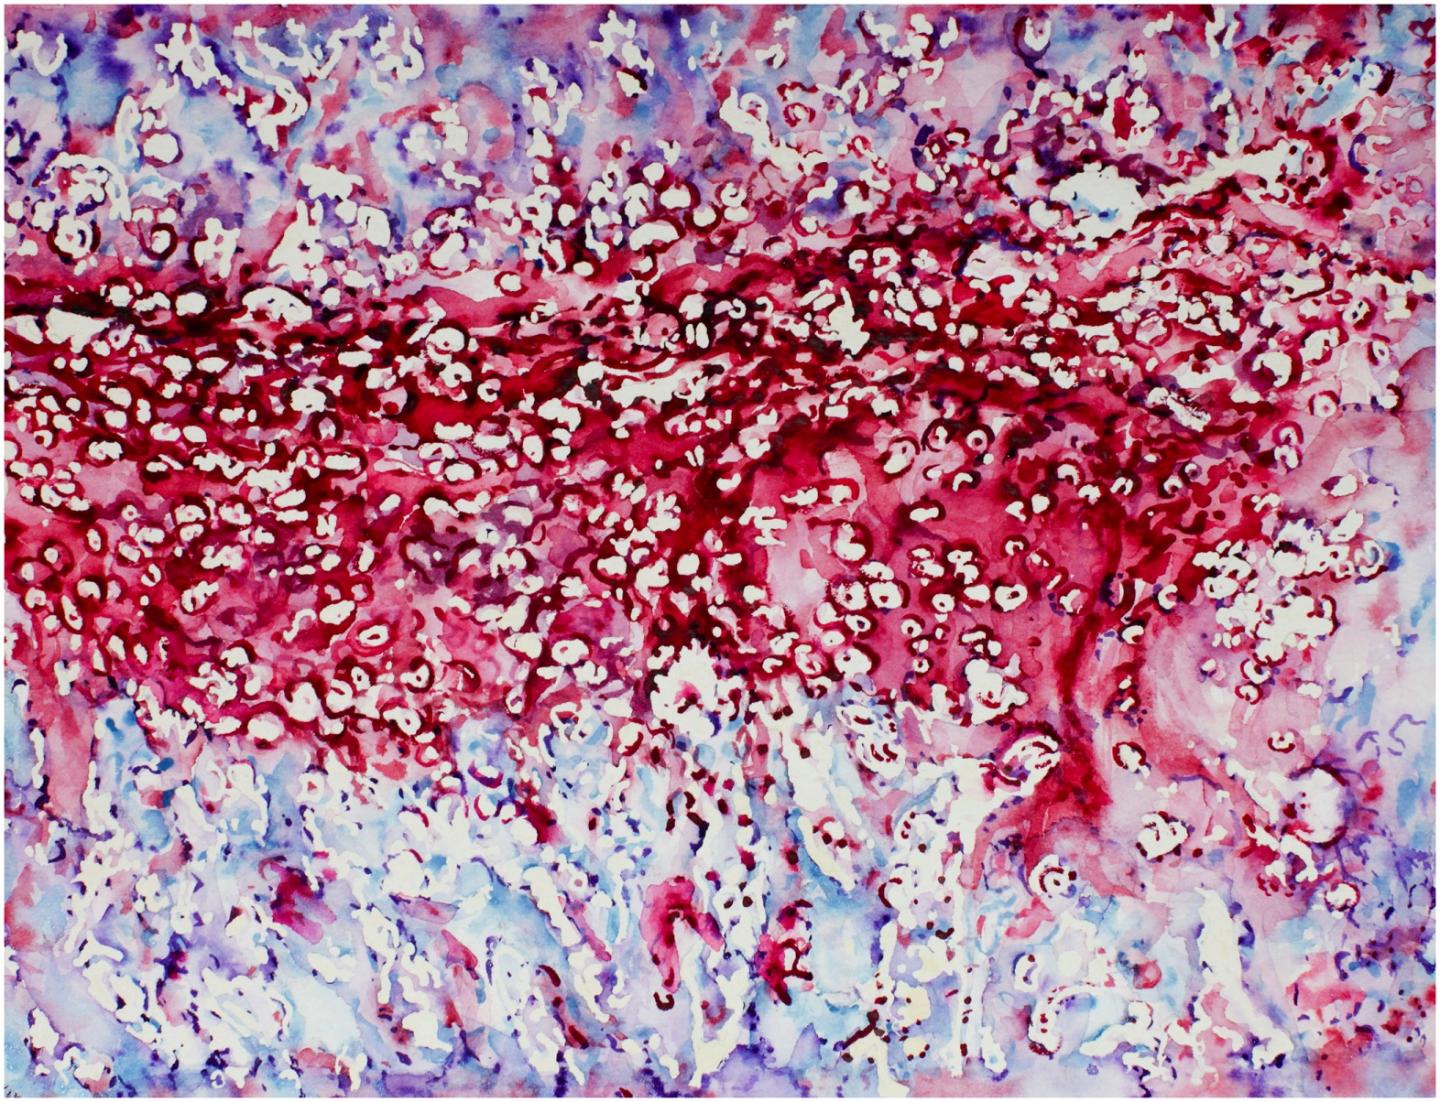 Watercolor of Endochondral Ossification